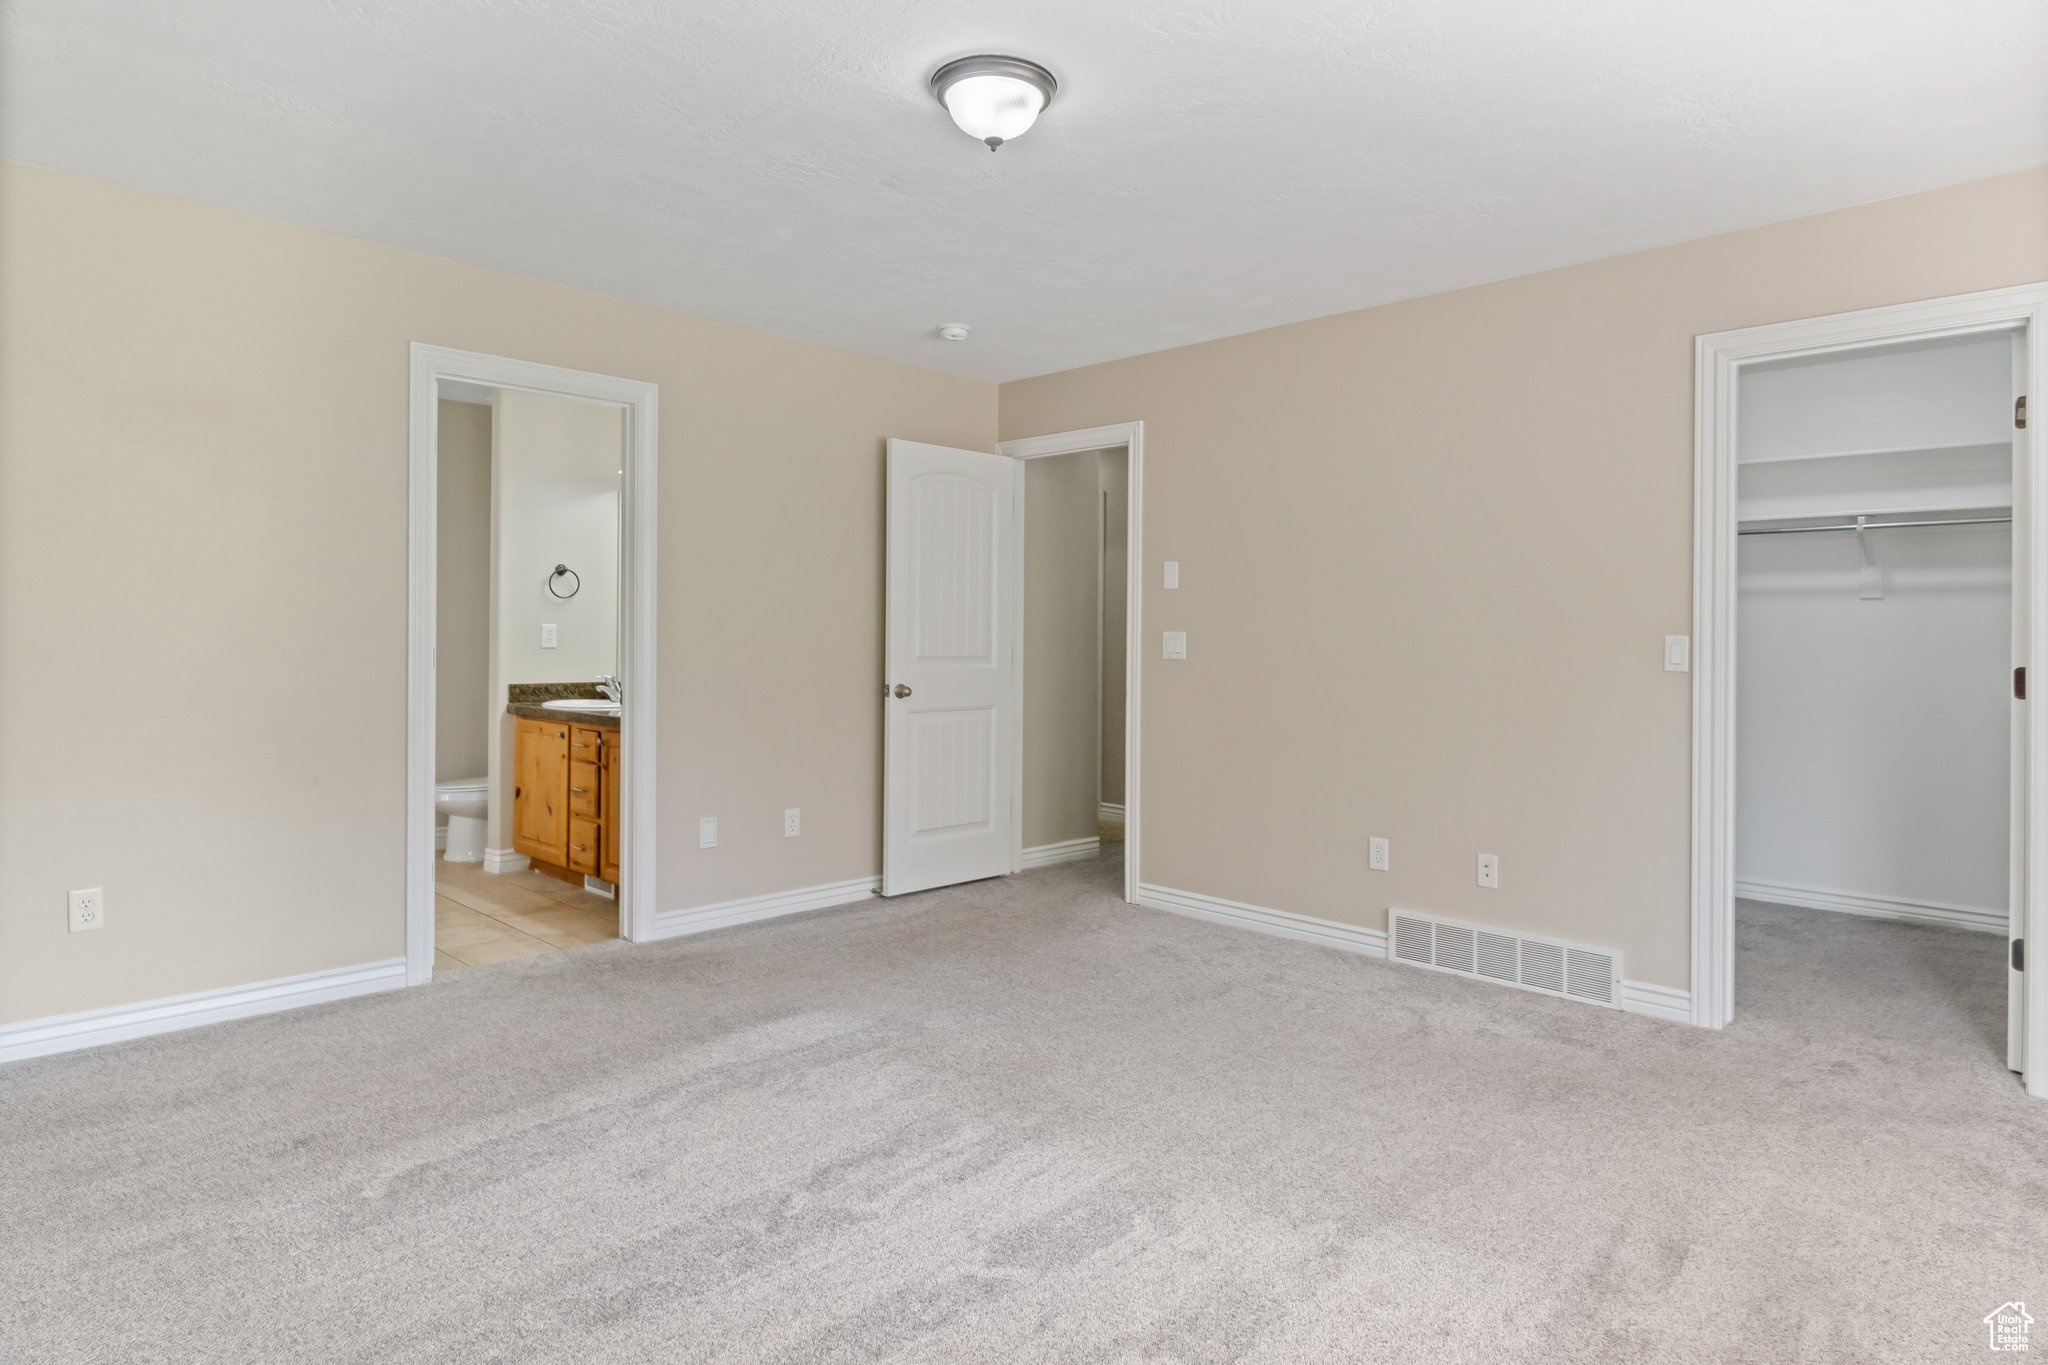 Unfurnished bedroom featuring light colored carpet, a walk in closet, ensuite bath, and a closet